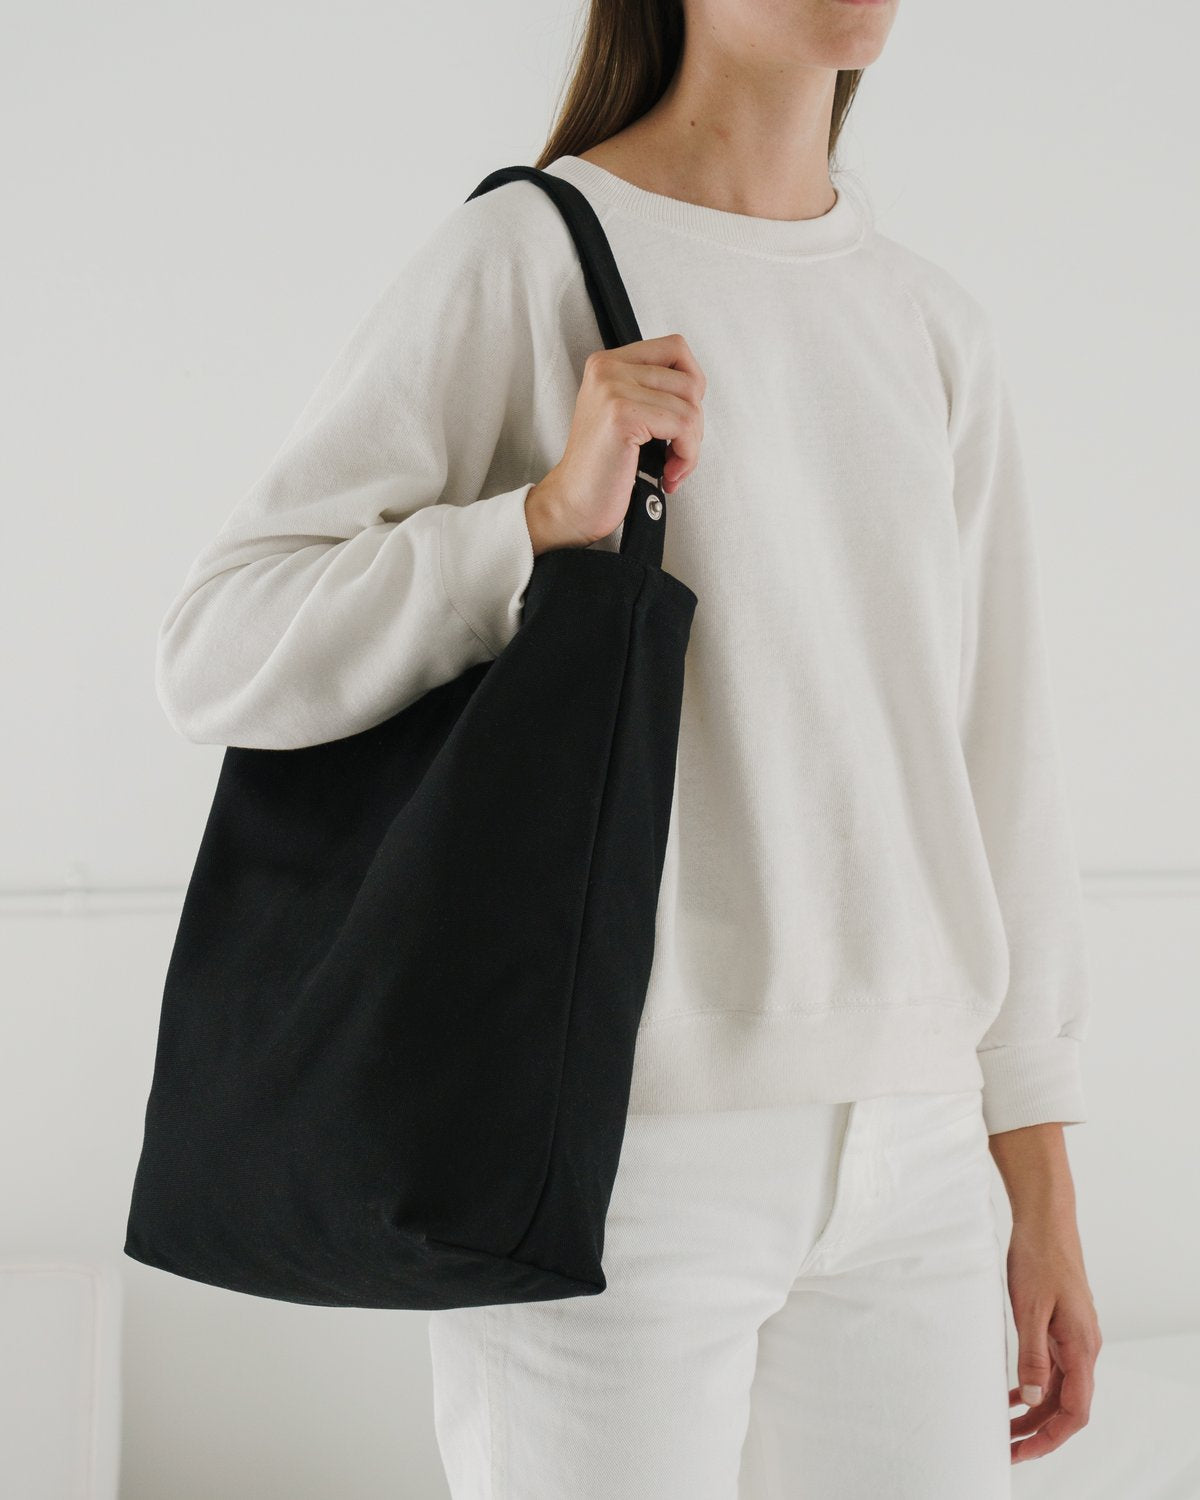 BAGGU's Newest Arrivals Are Packed With Perfect Fall Options